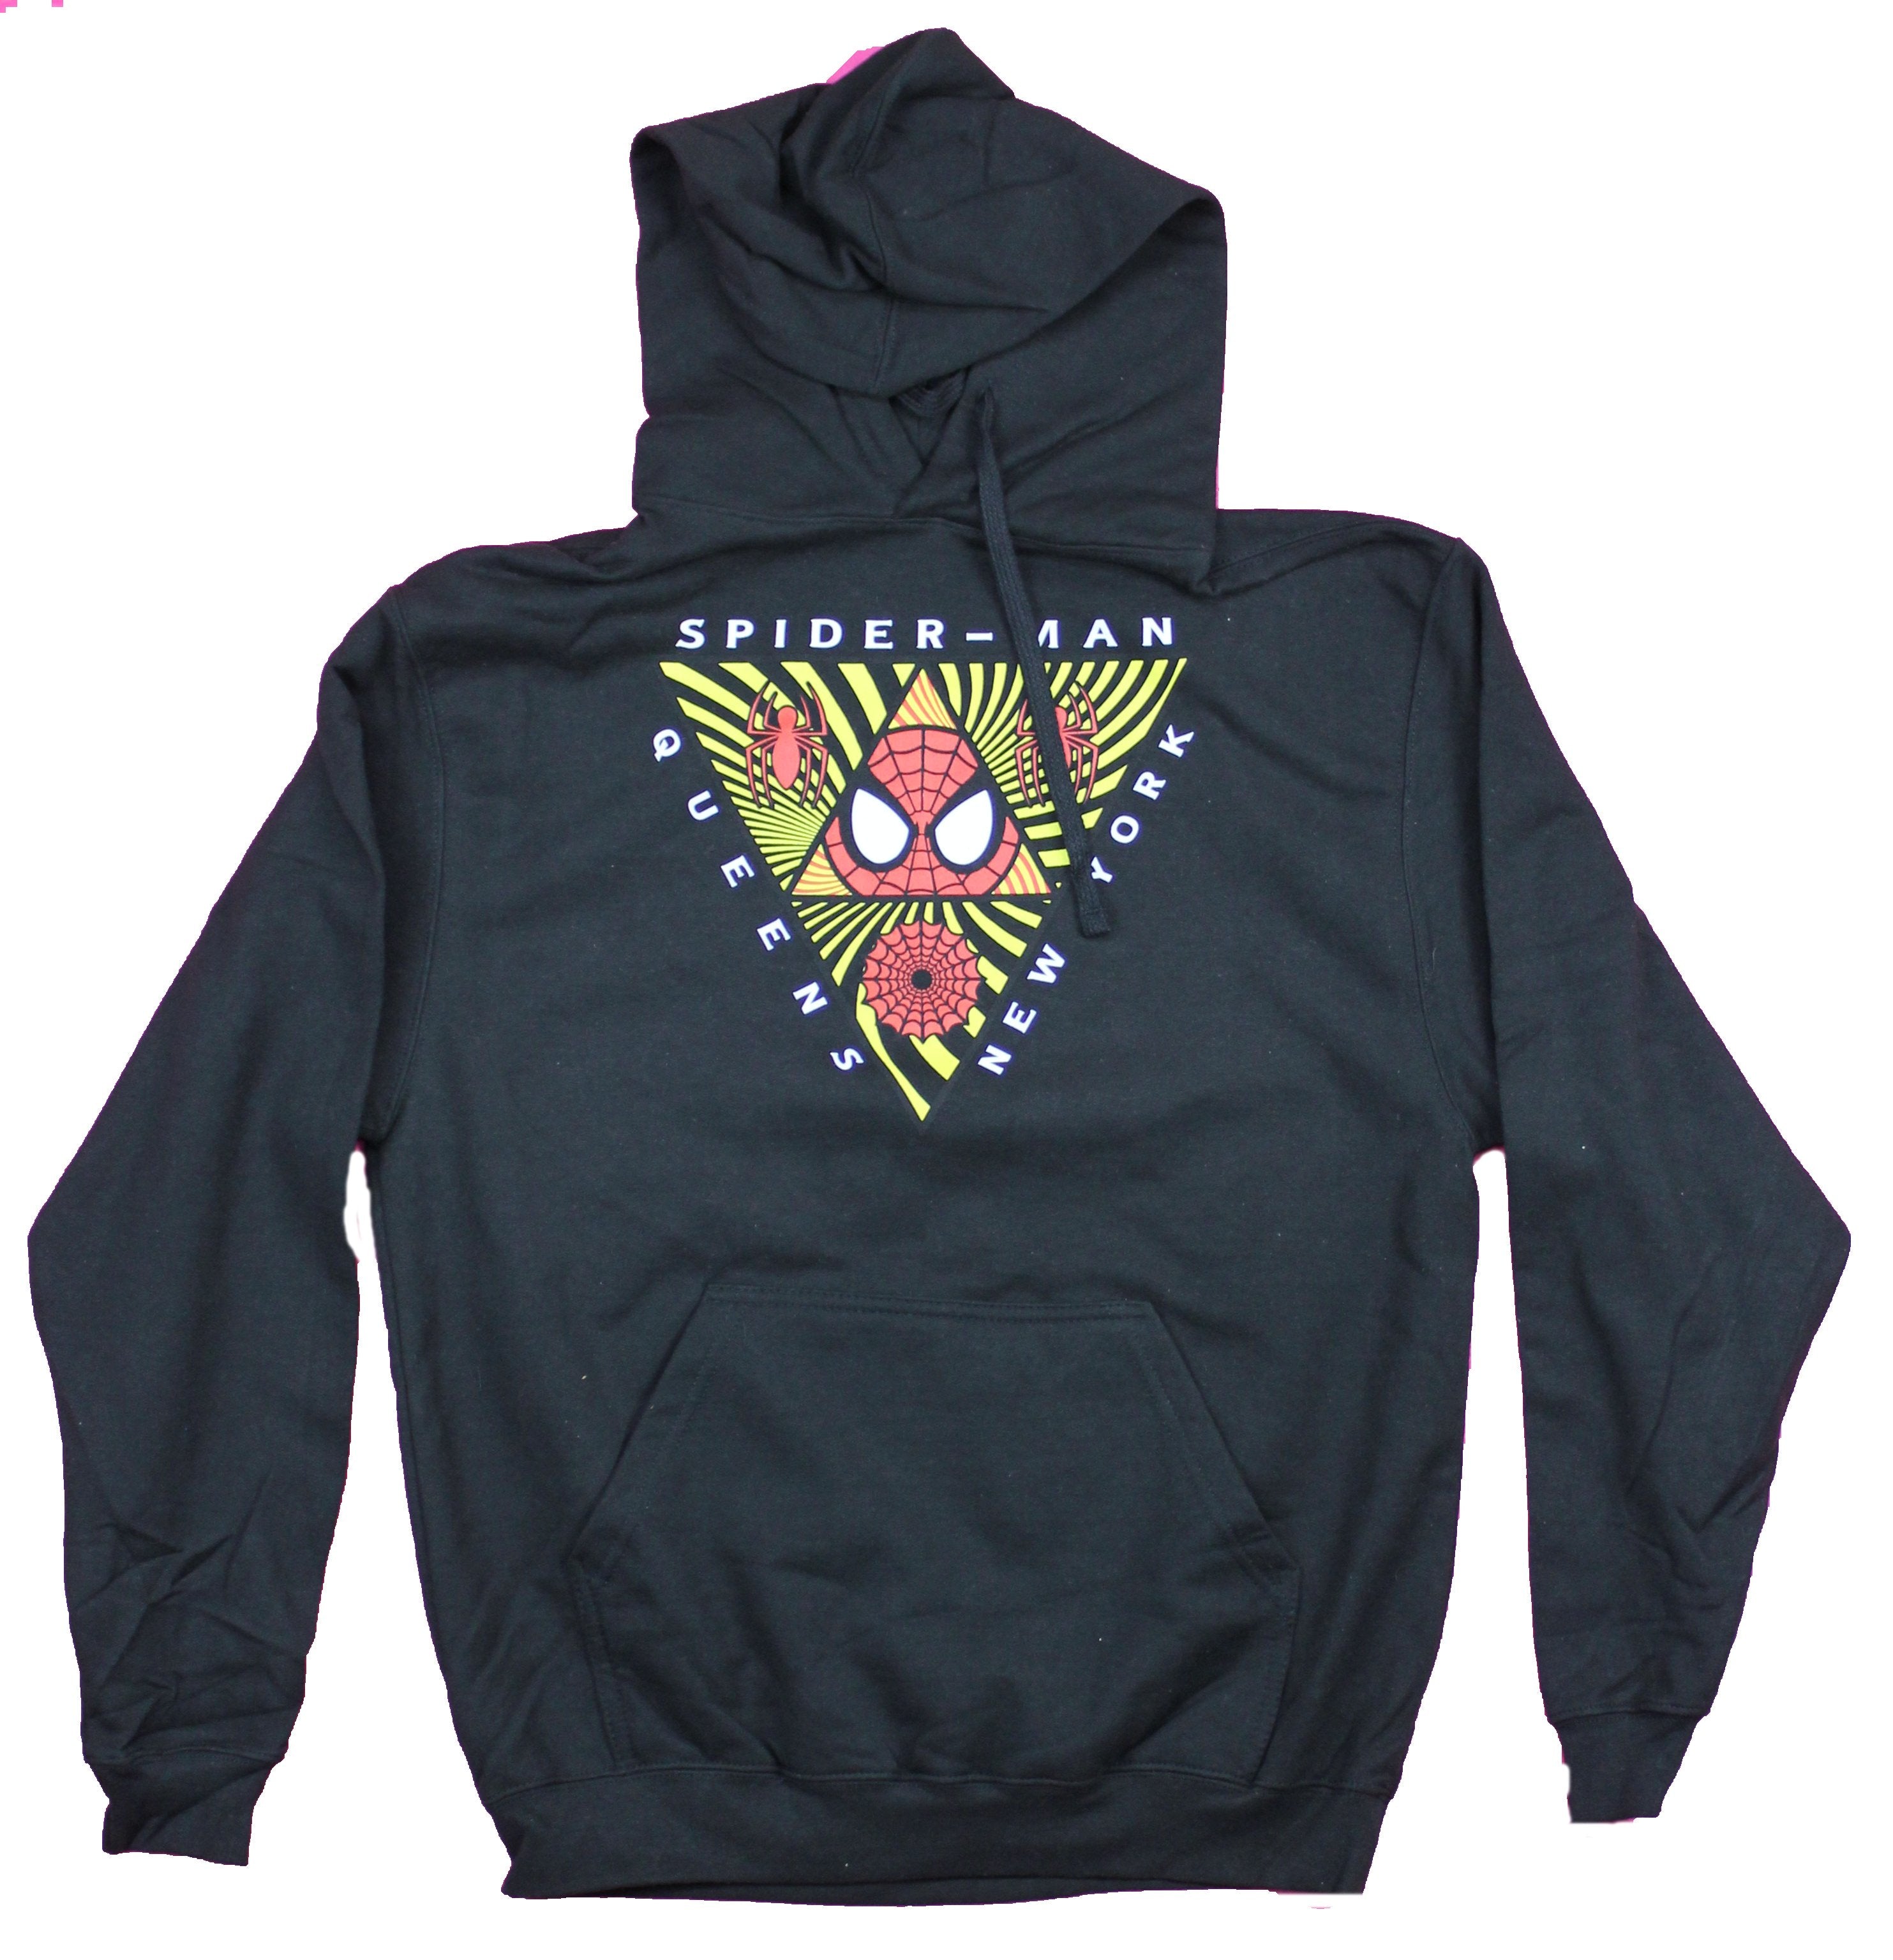 Spider-Man Pullover Hoodie - Triangle Queens New York Hypno Image Black